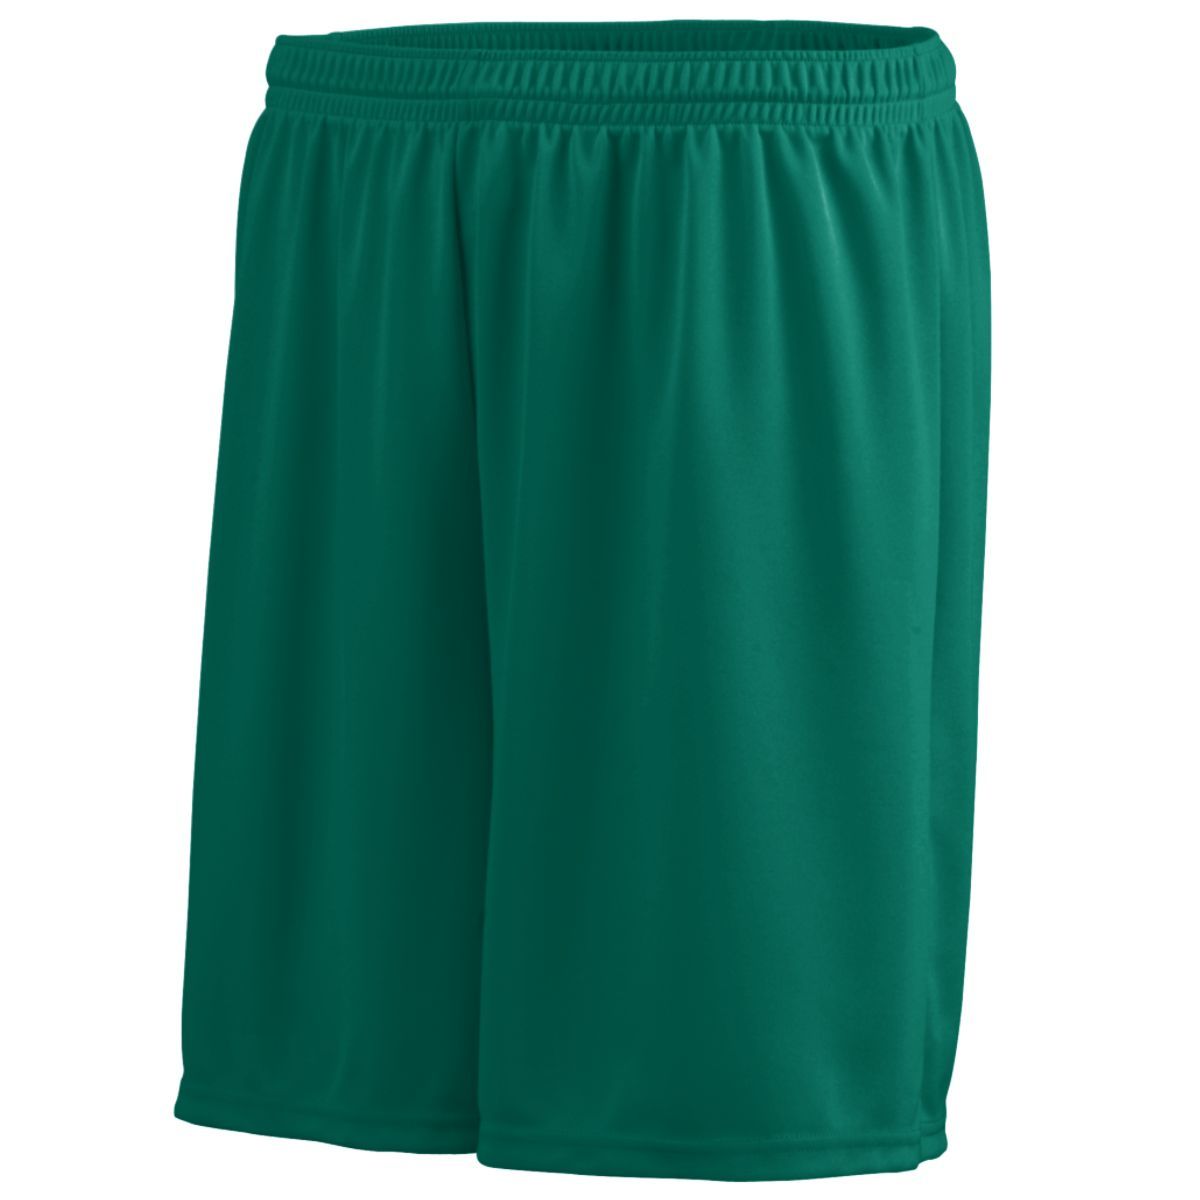 Augusta Sportswear Youth Octane Shorts in Dark Green  -Part of the Youth, Youth-Shorts, Augusta-Products product lines at KanaleyCreations.com